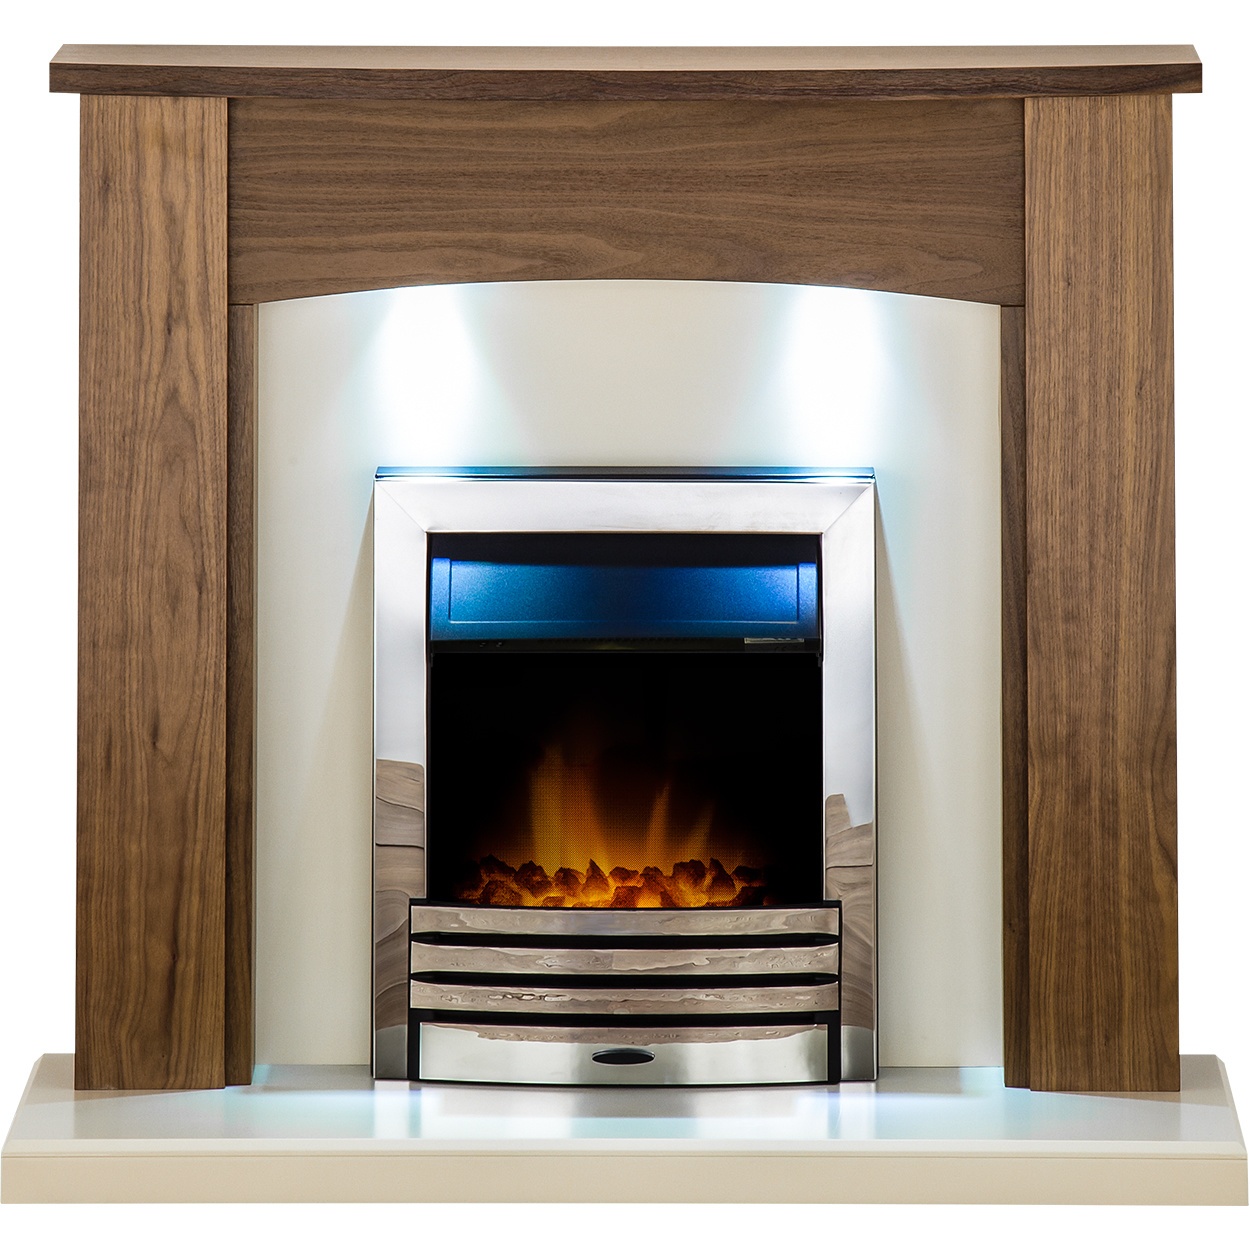 Clearance Electric Fireplace New Details About Adam Fireplace Suite Walnut & Eclipse Electric Fire Chrome and Downlights 48"